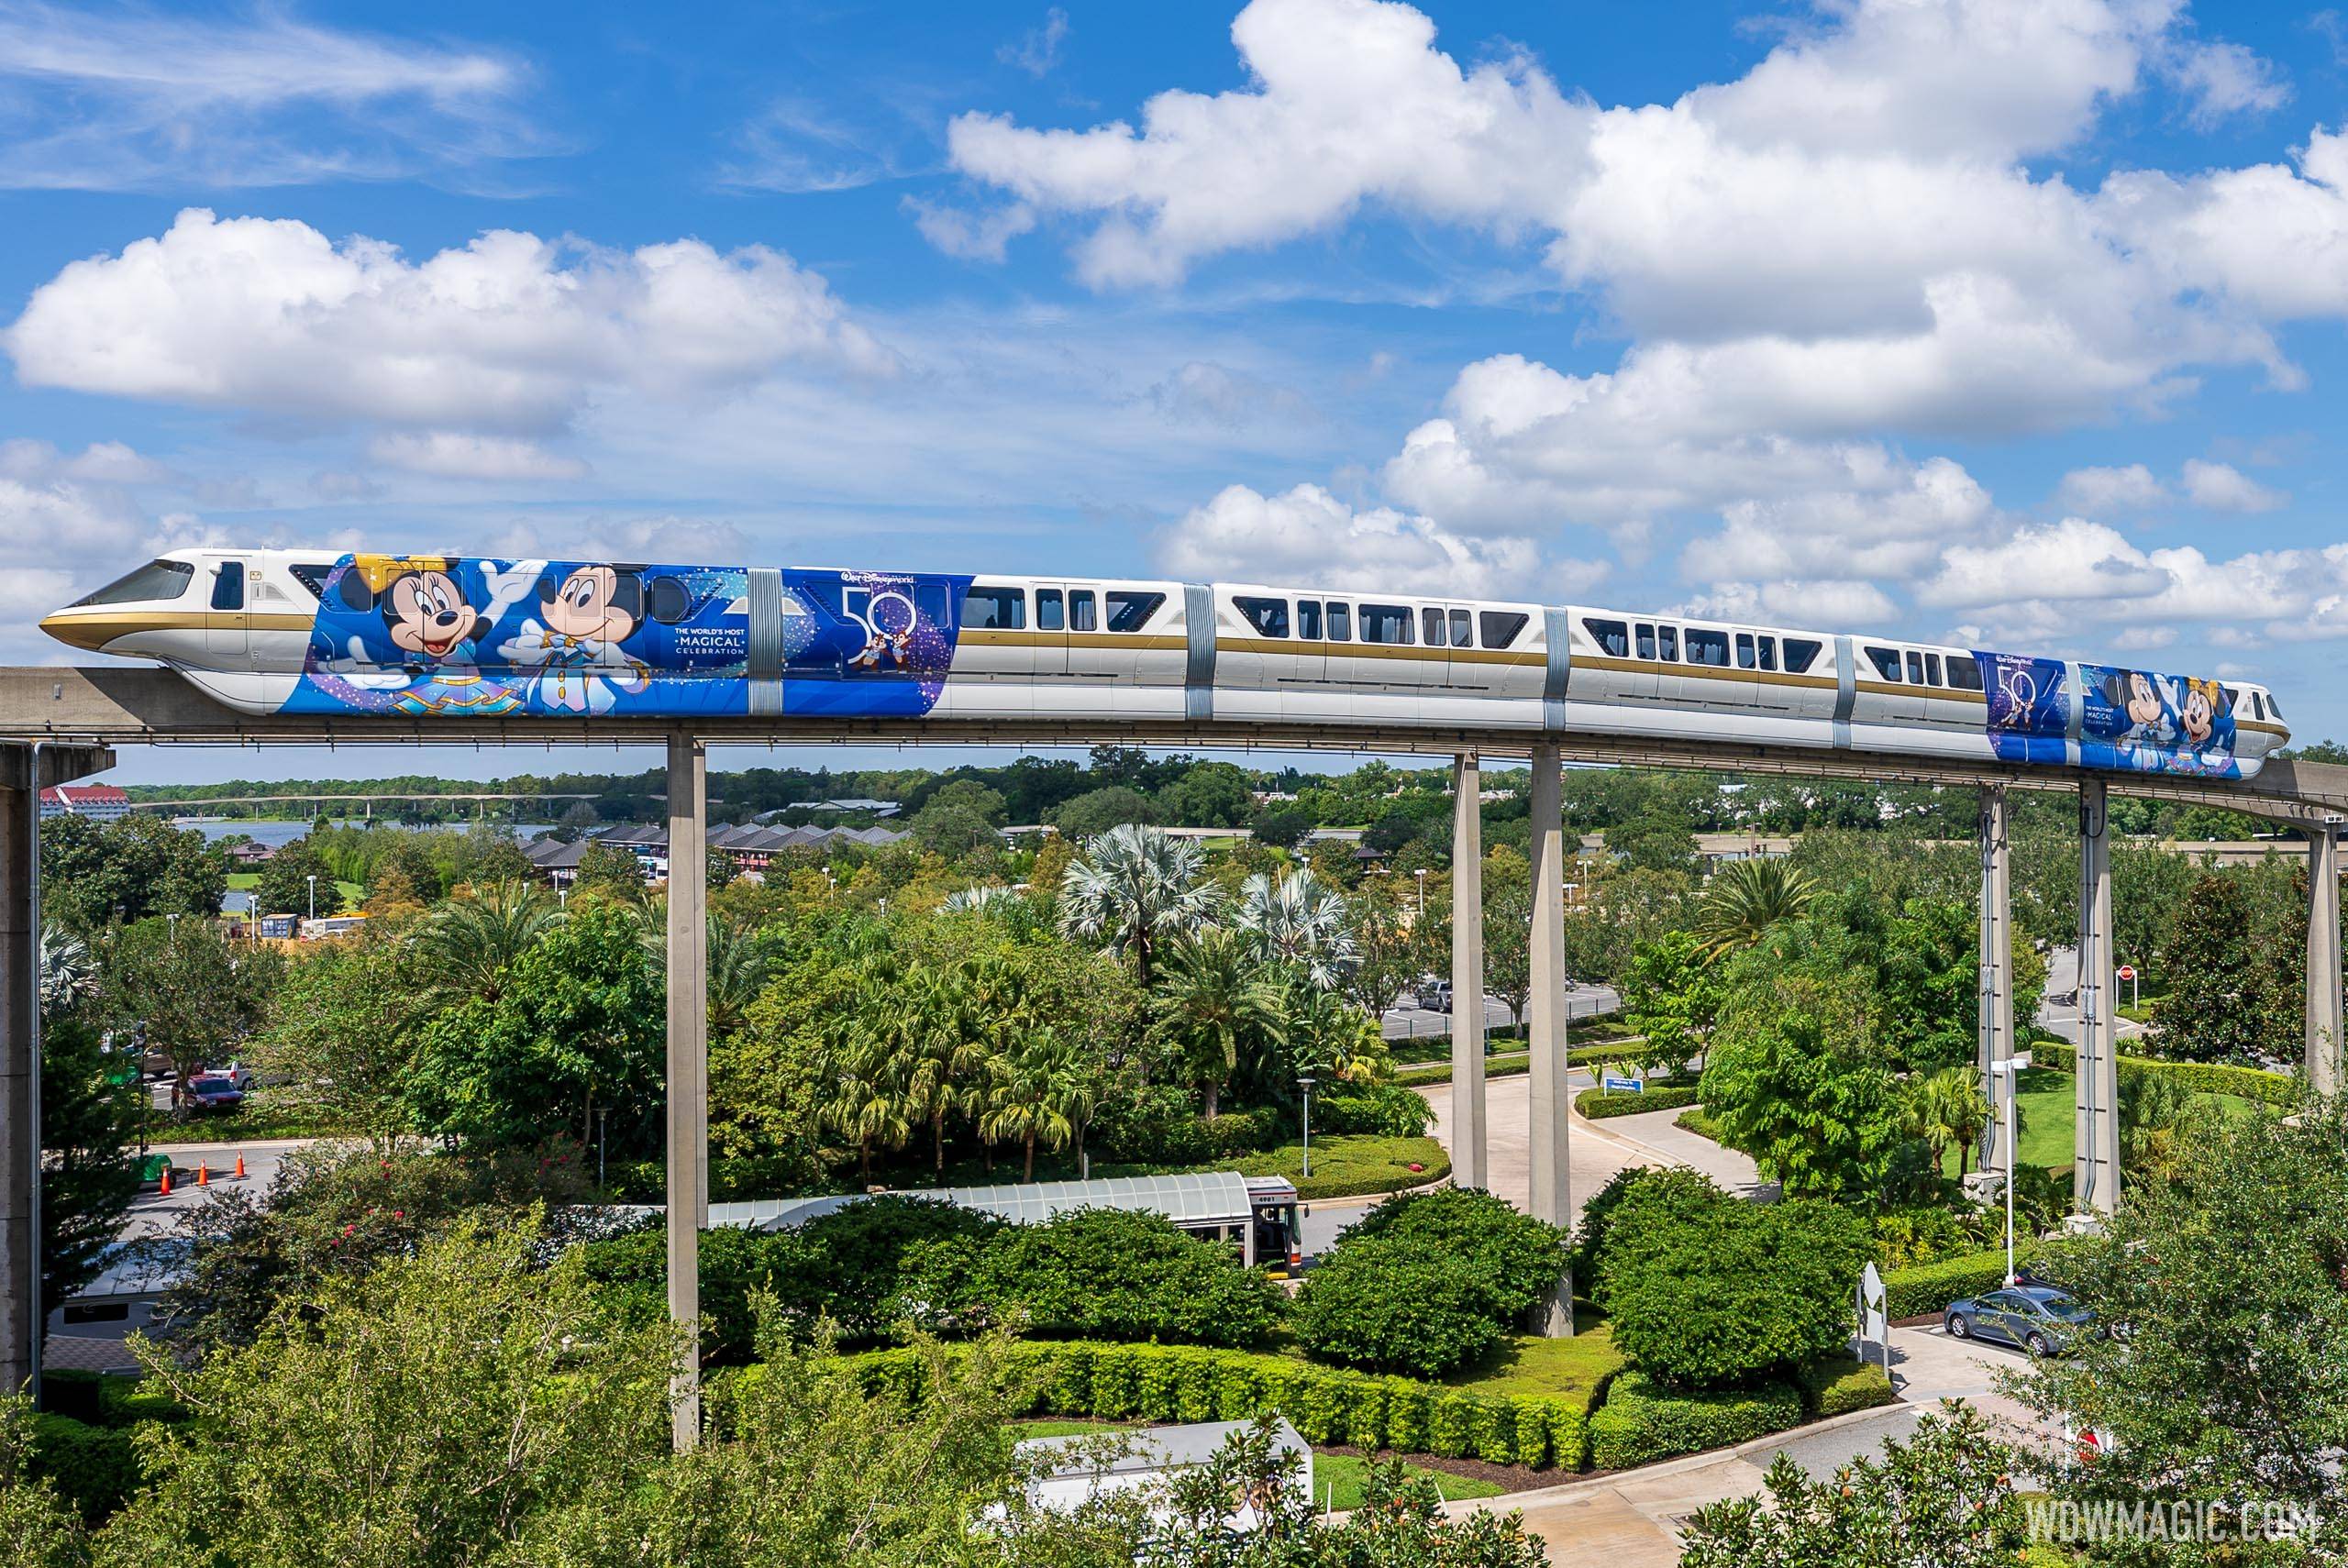 Monorail Gold wrapped with Walt Disney World 50th anniversary 'World's Most Magical Celebration' decal